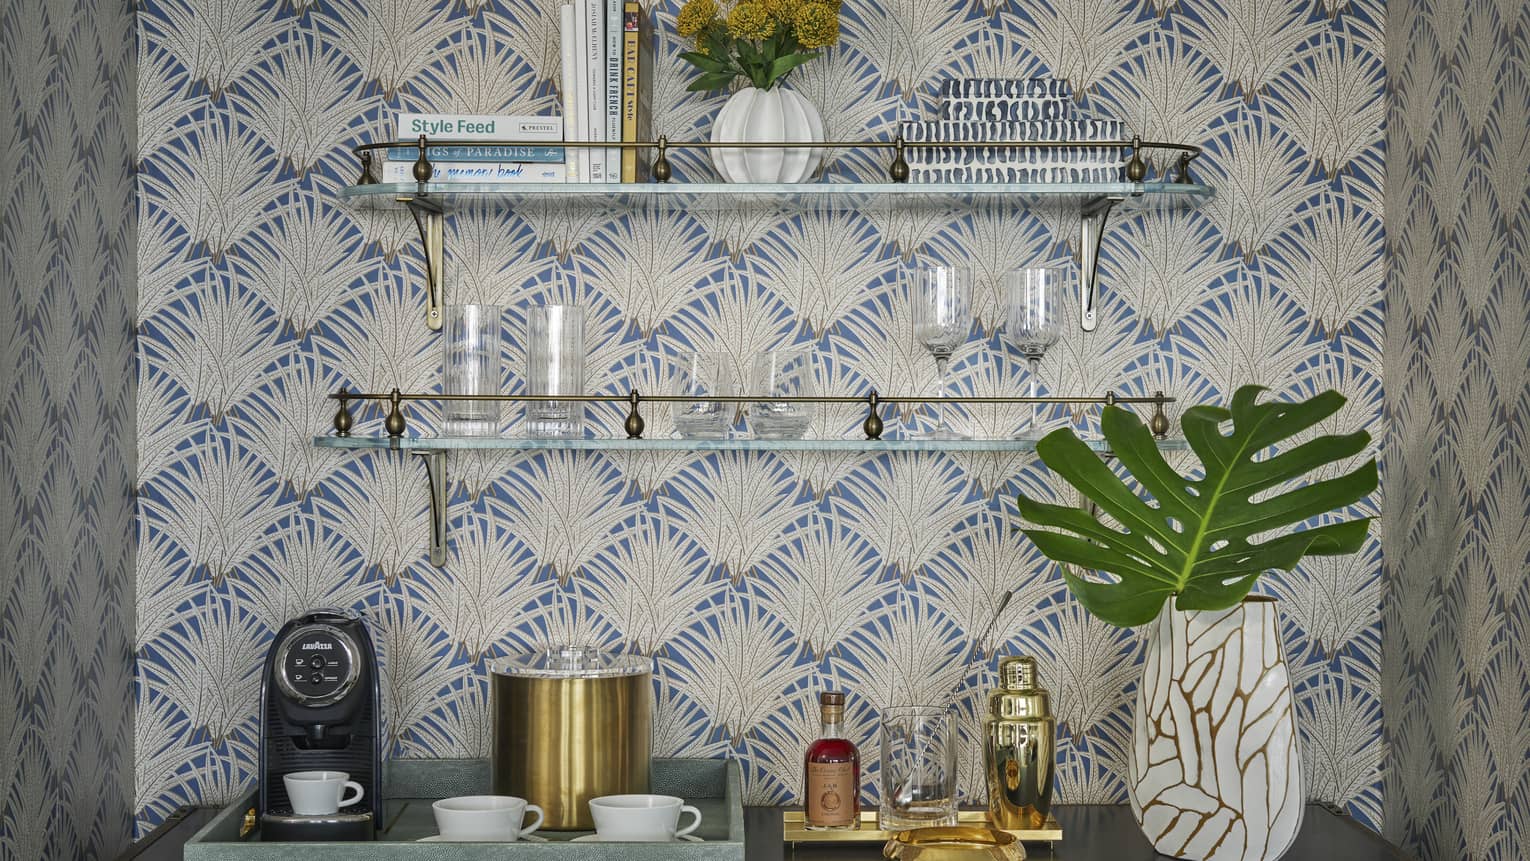 A bar set up on a sideboard, set against a wall with two shelves and tropical wallpaper